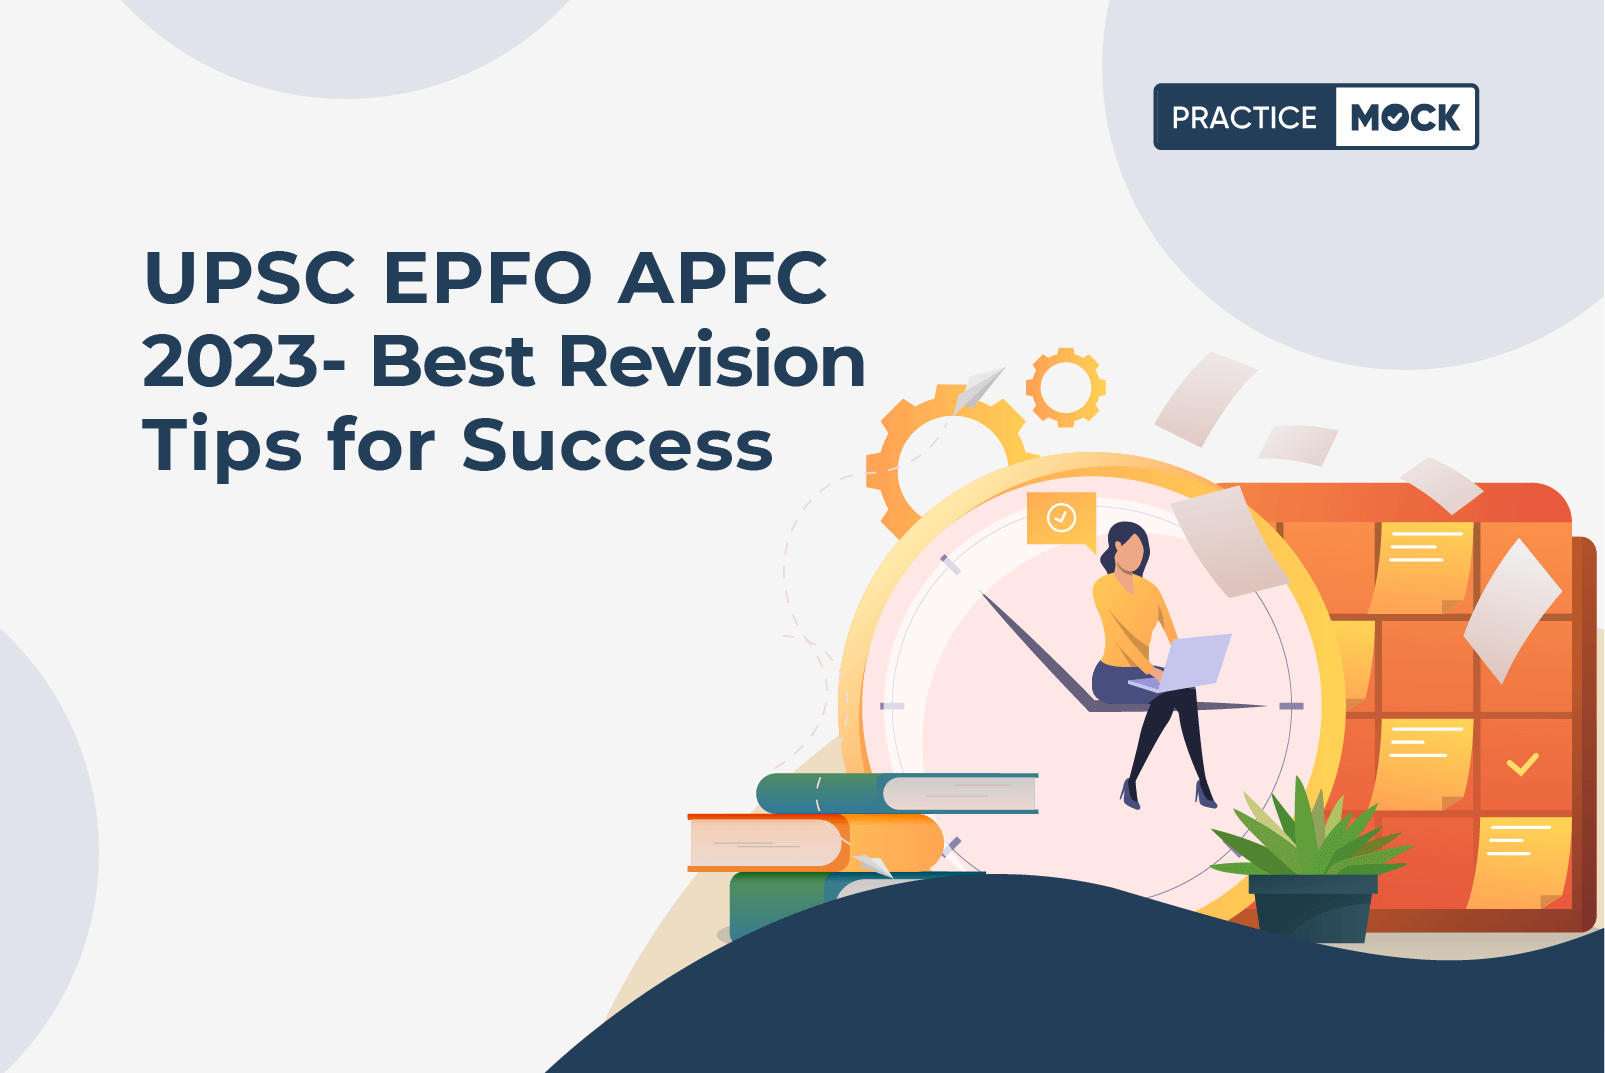 UPSC EPFO APFC 2023-Best Revision Tips for Success